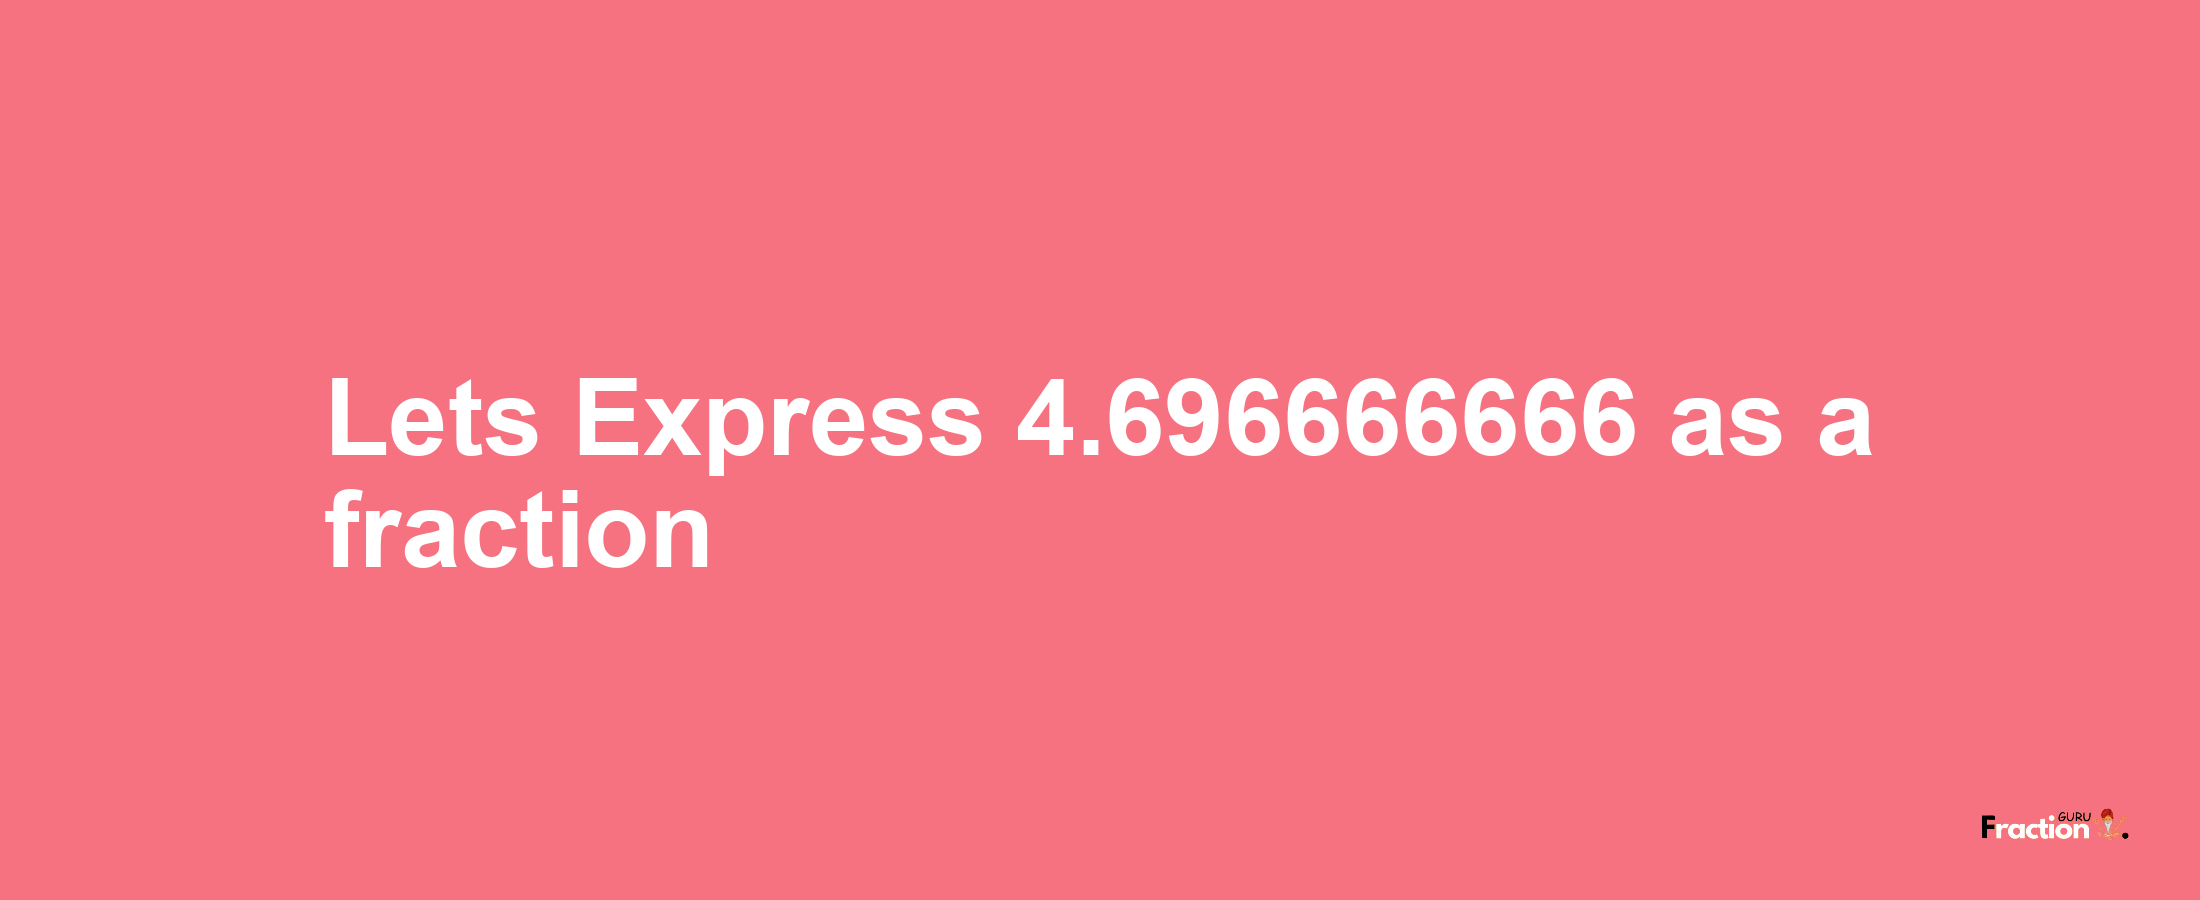 Lets Express 4.696666666 as afraction